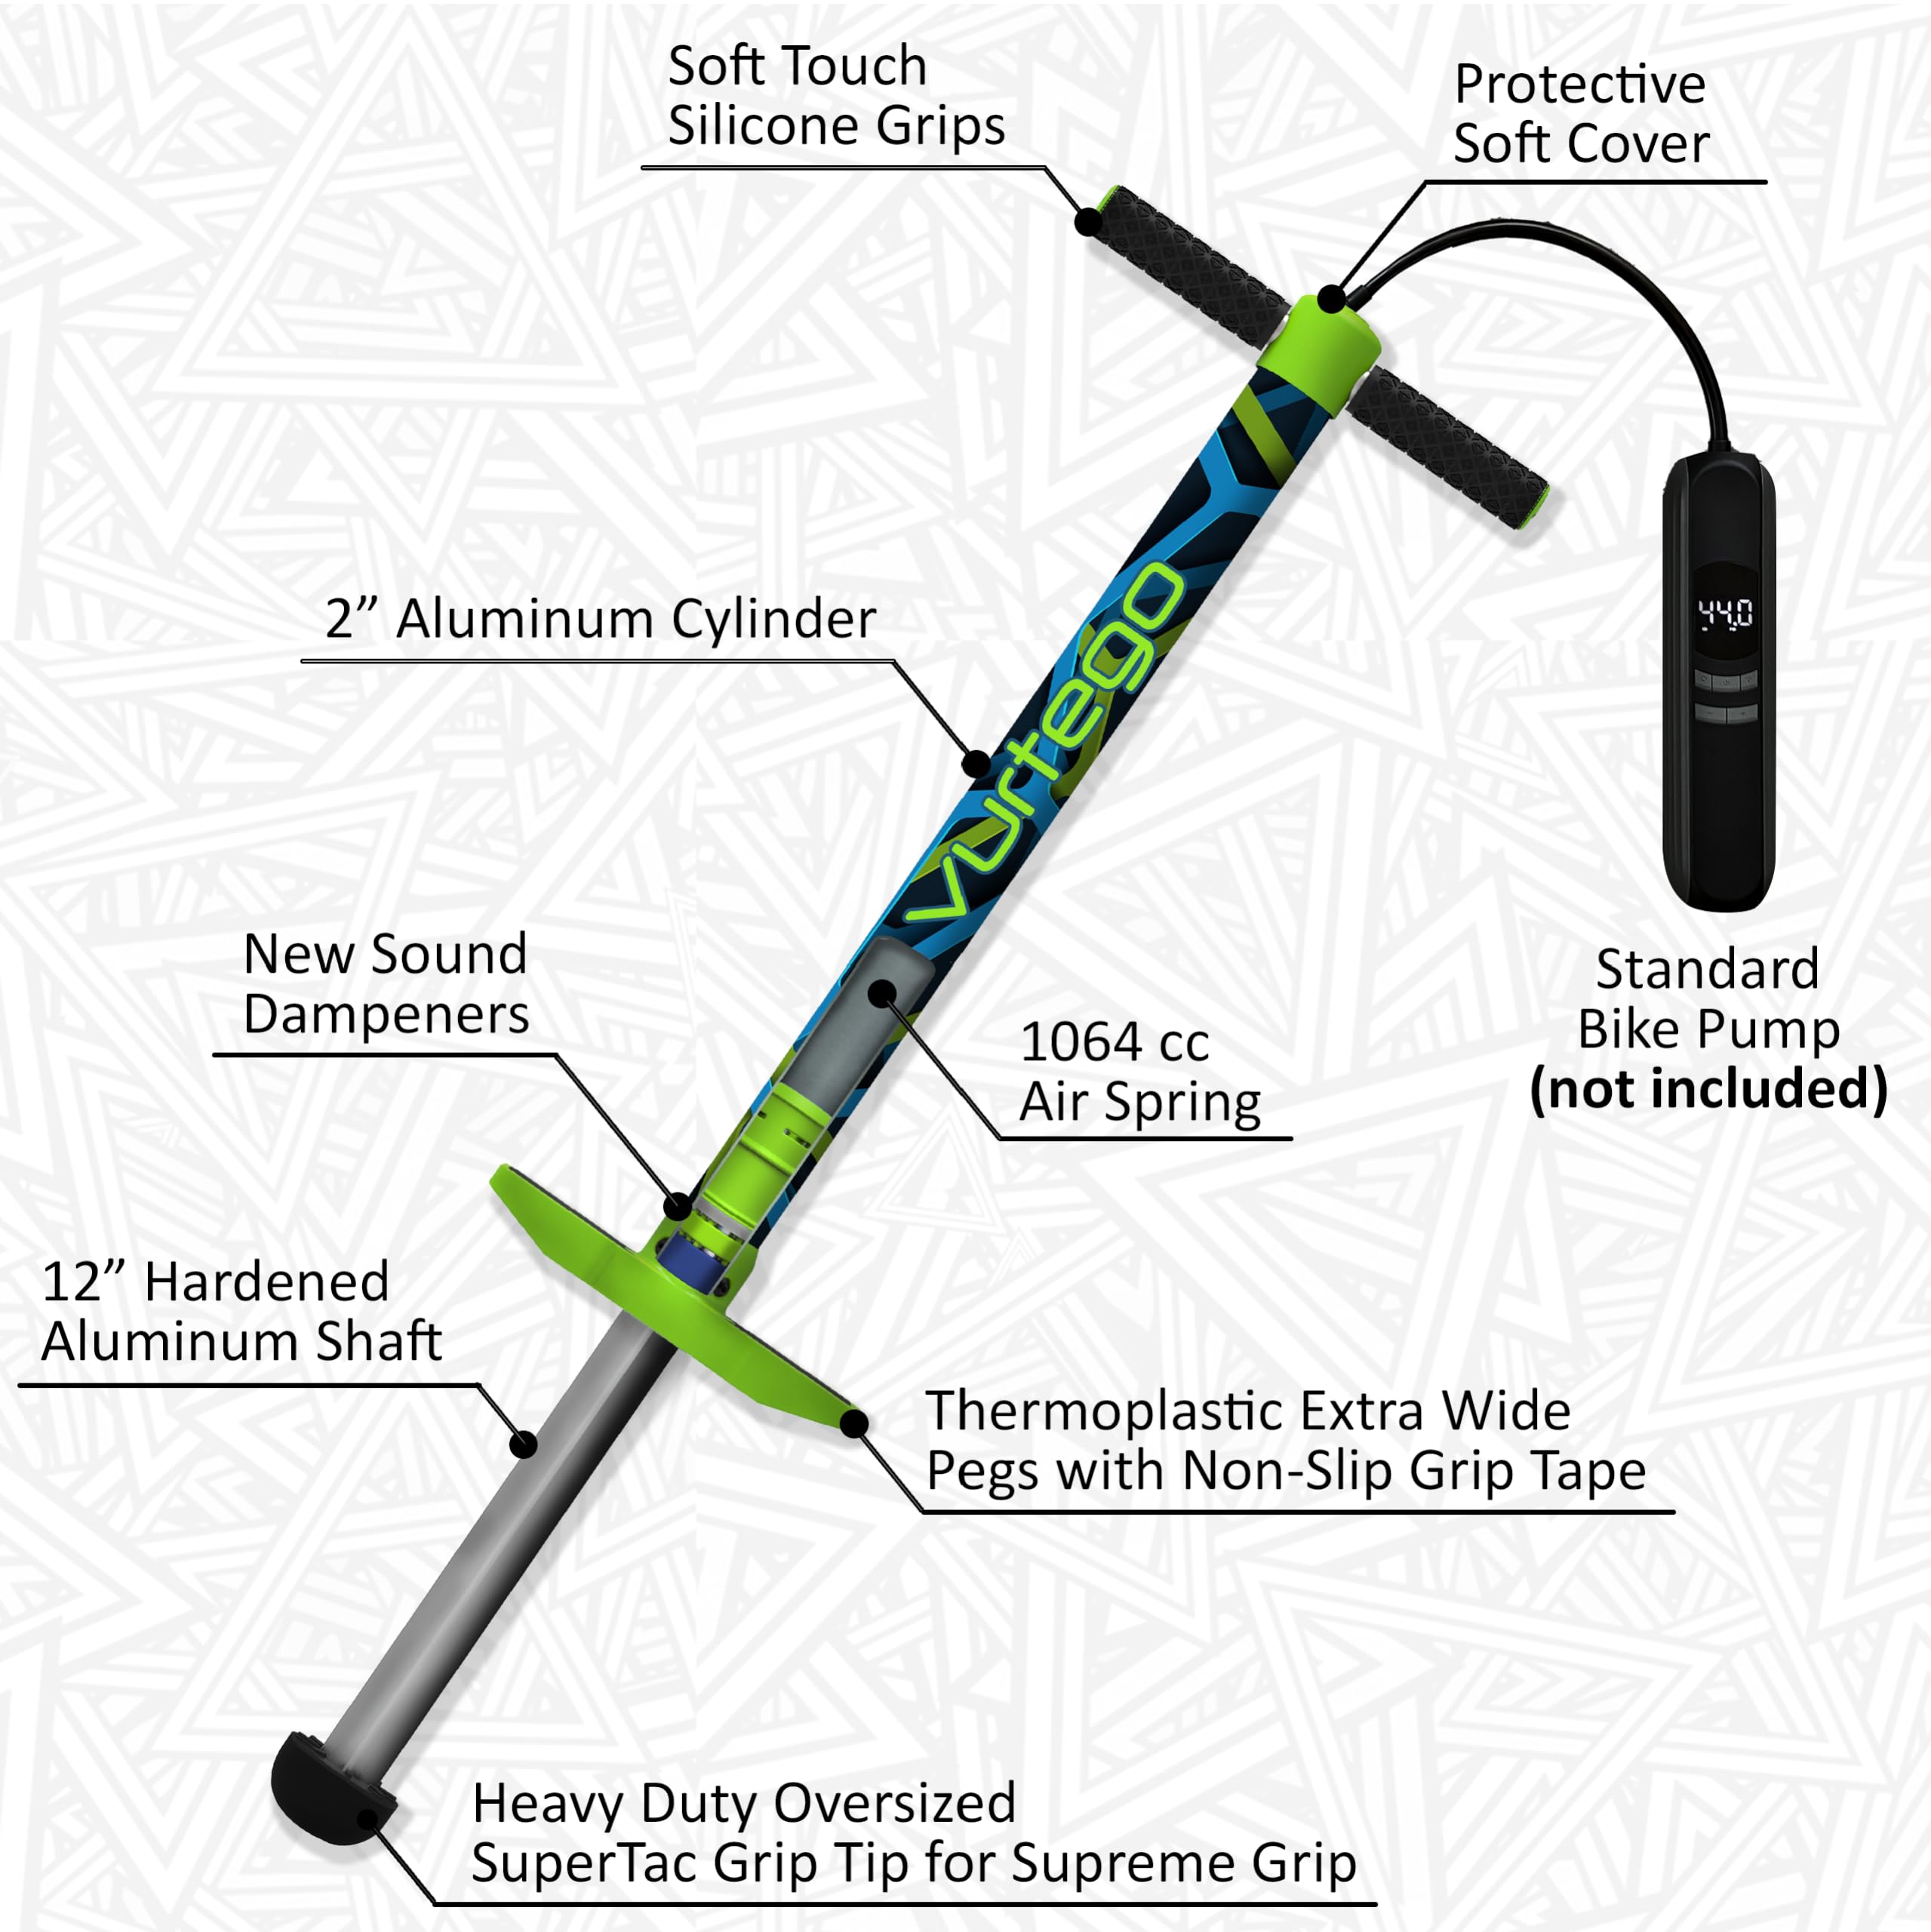 Vurtego Slingshot Pogo Stick – Patented Air-Powered Adjustable Spring for Controlled Jumps Over 5ft, Pogo Stick for Kids Age 5 and up, and Adults, Outdoor Toys, 40 to 180lbs, Durable, Lightweight